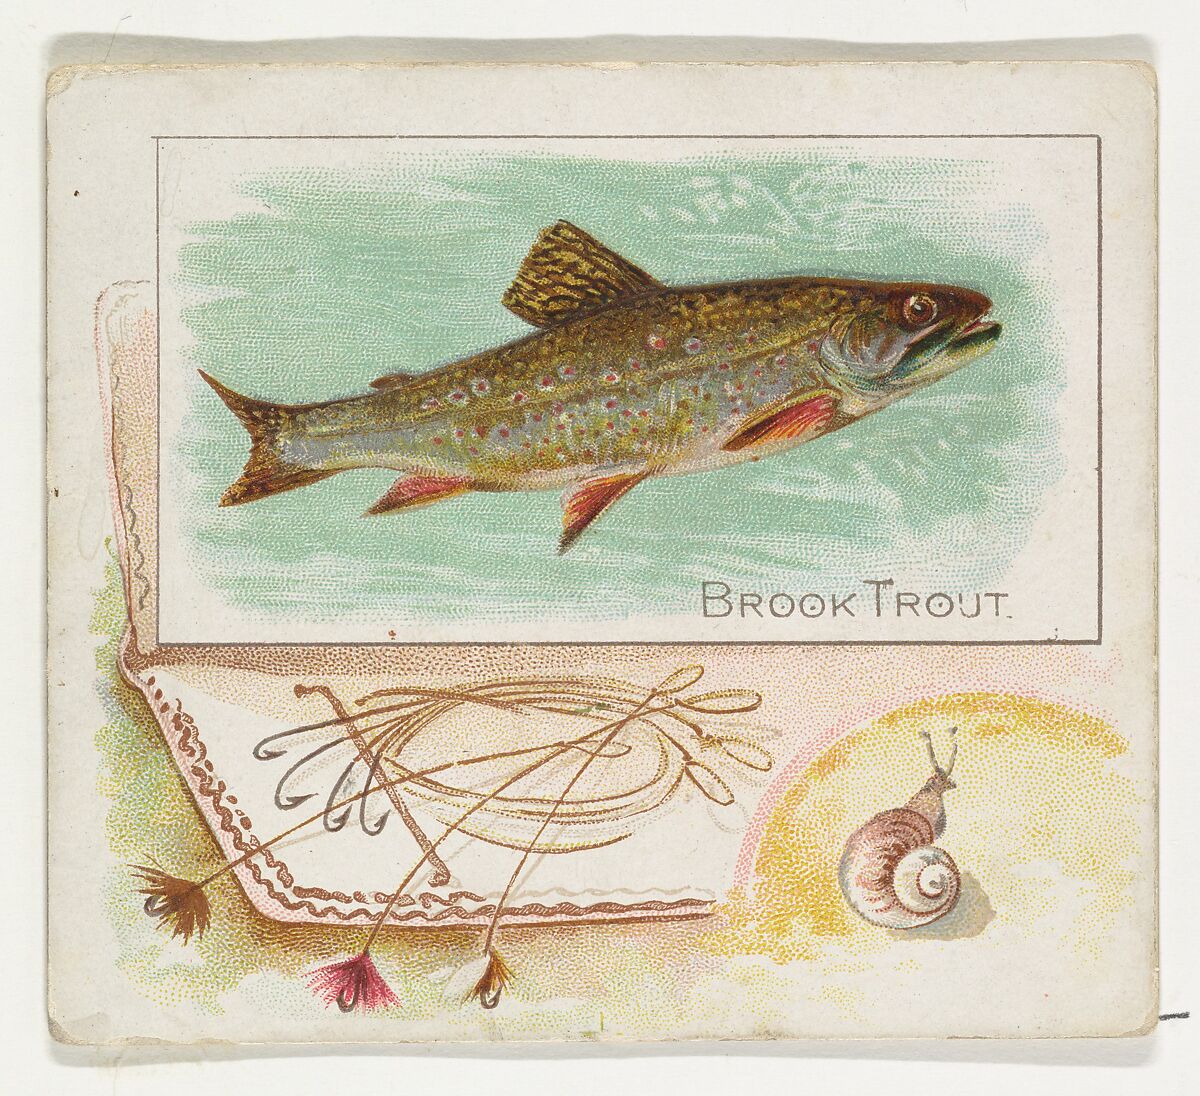 Brook Trout, from Fish from American Waters series (N39) for Allen & Ginter Cigarettes, Issued by Allen &amp; Ginter (American, Richmond, Virginia), Commercial color lithograph 